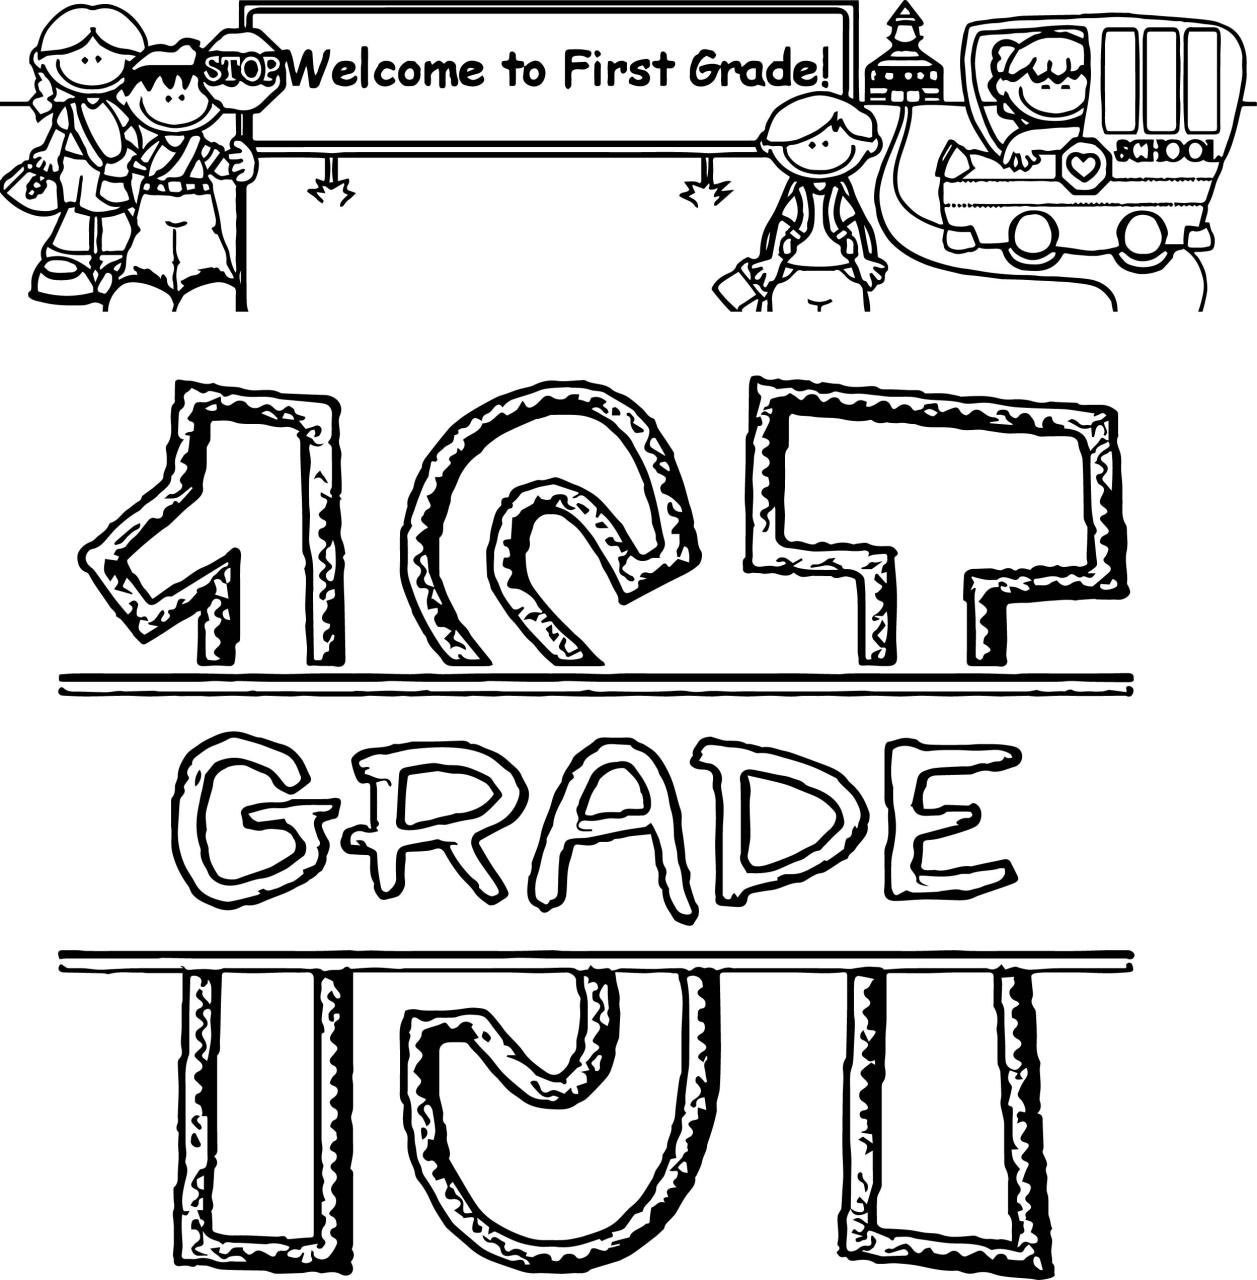 Coloring pages kids To 1st Grade Coloring Sheet